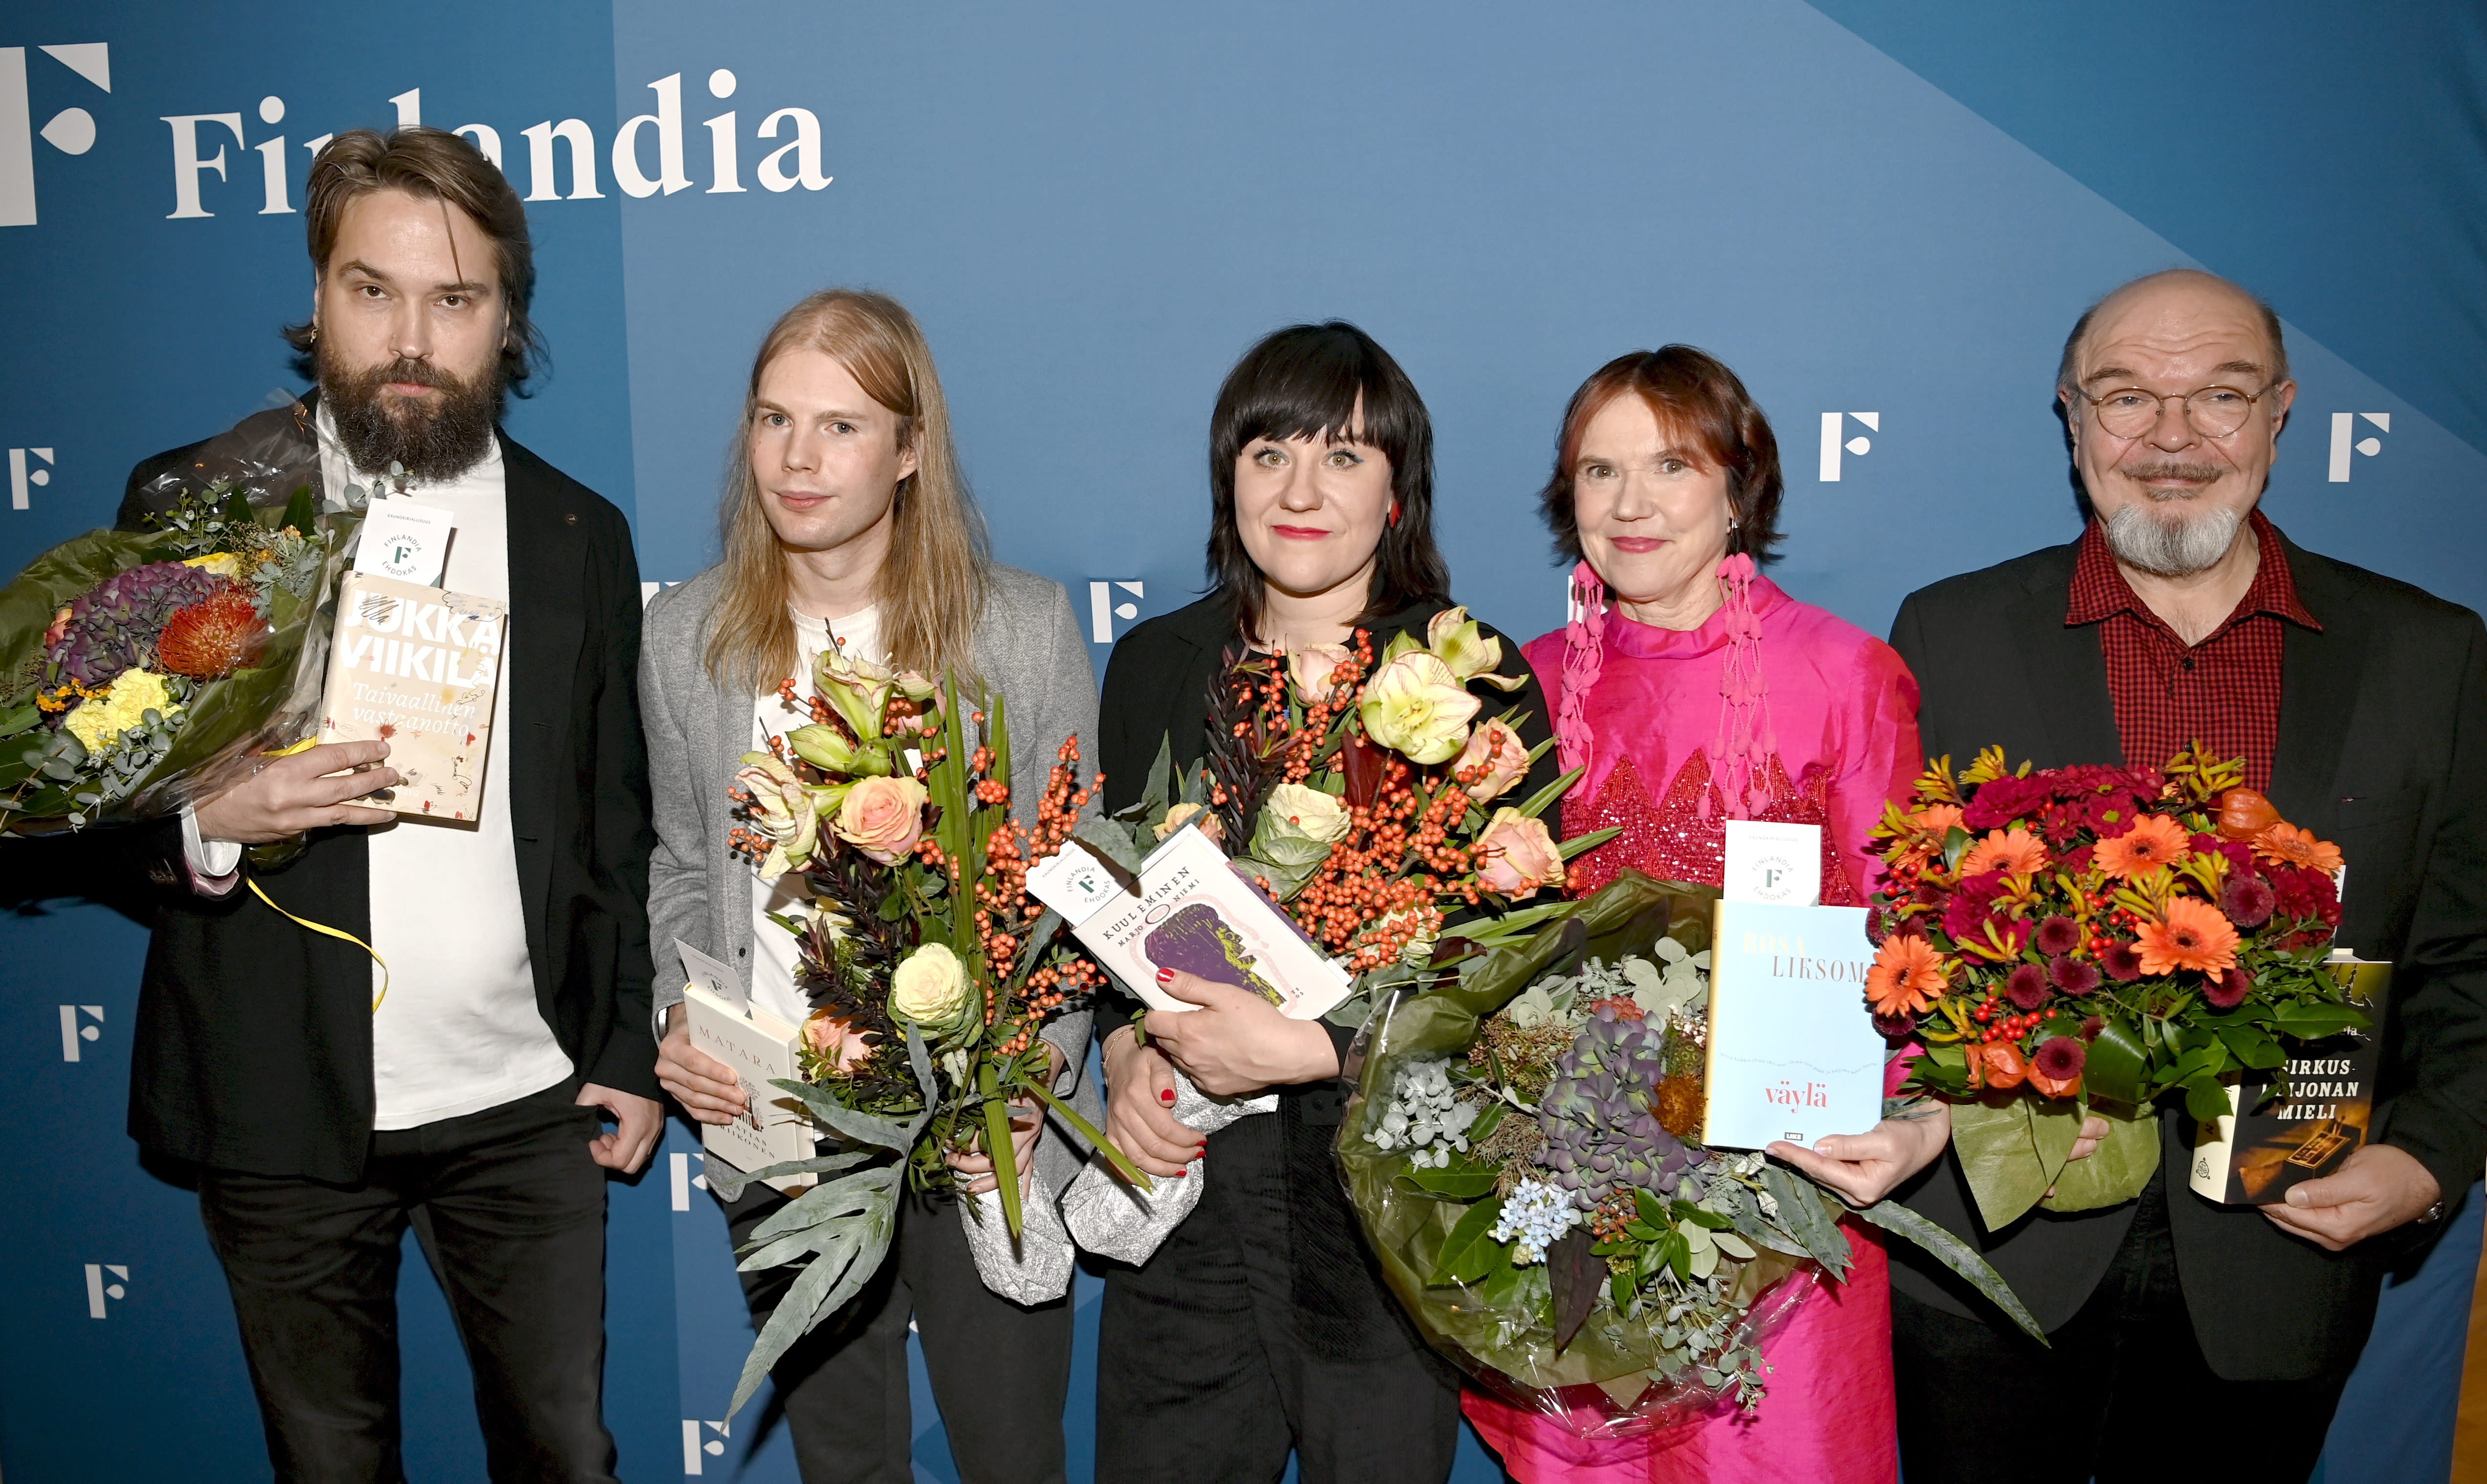 The list of Finlandia literary awards was published, half of the candidates are previous winners